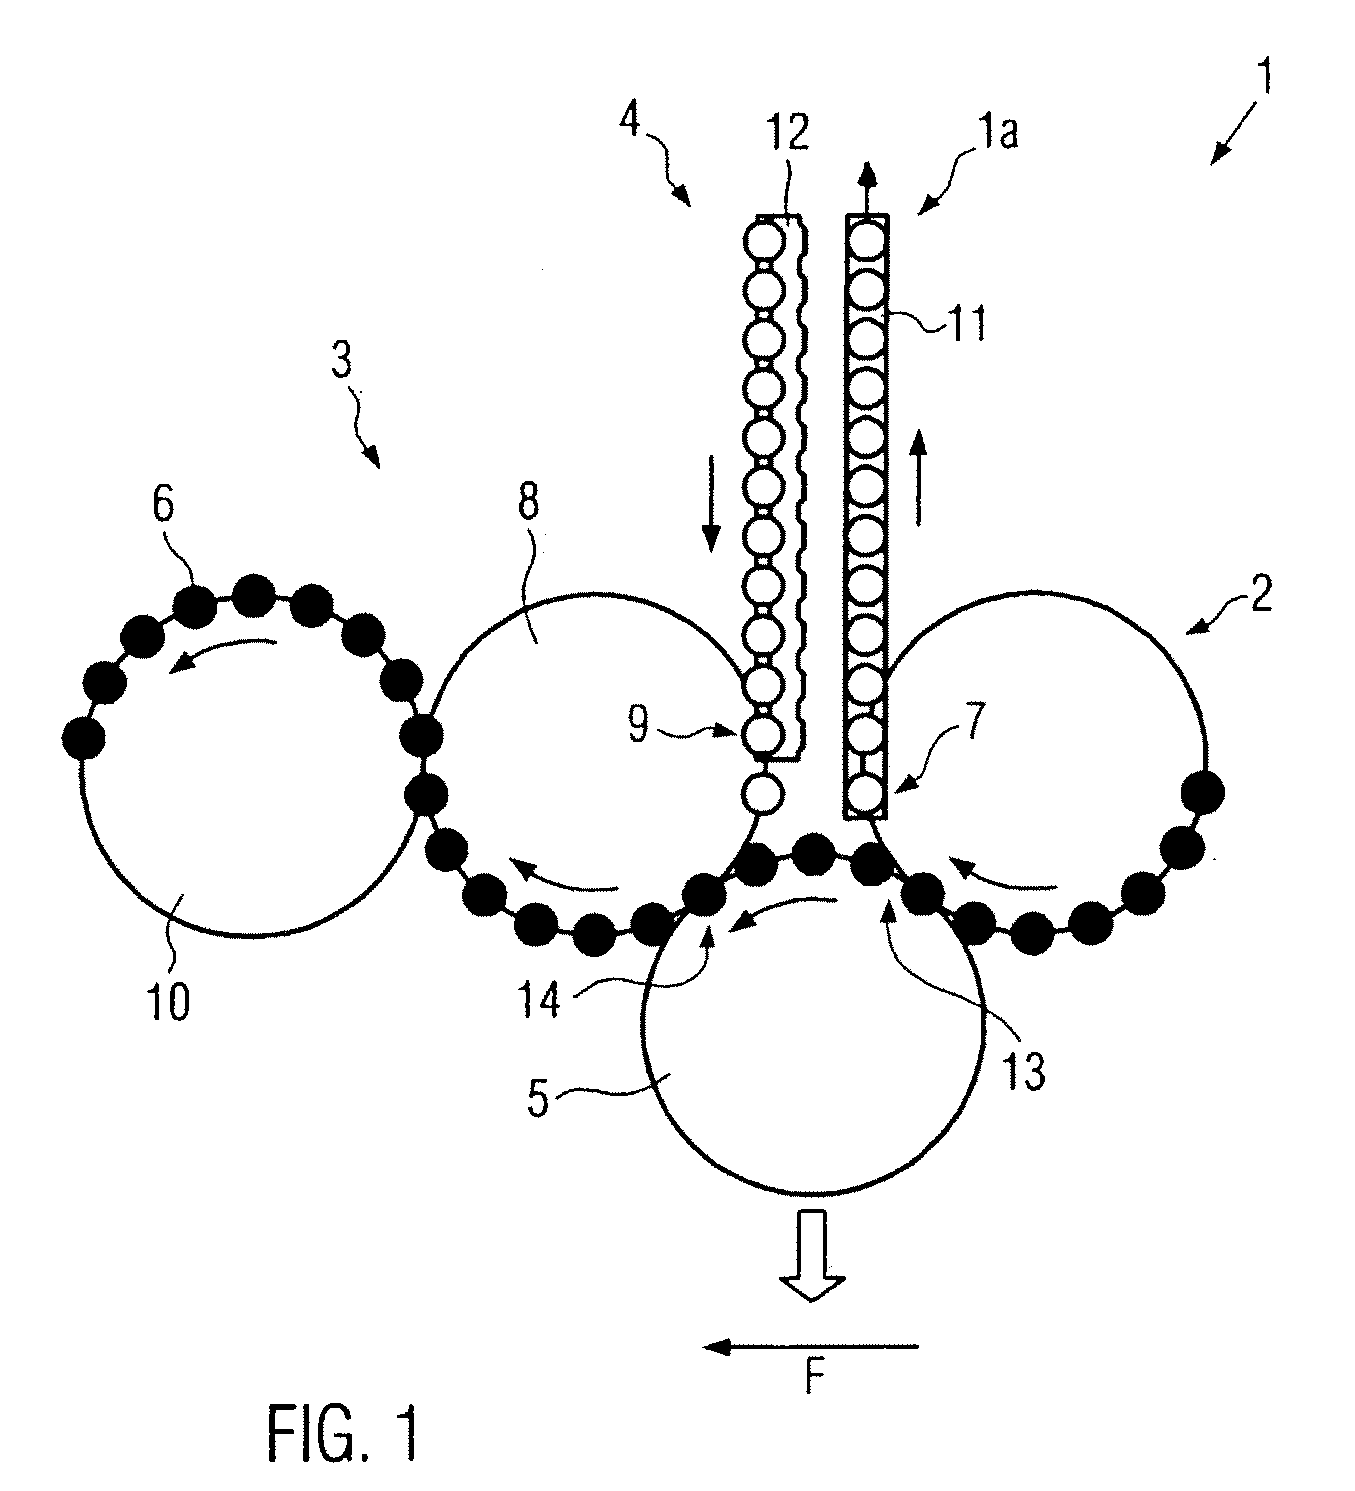 Conveying Device